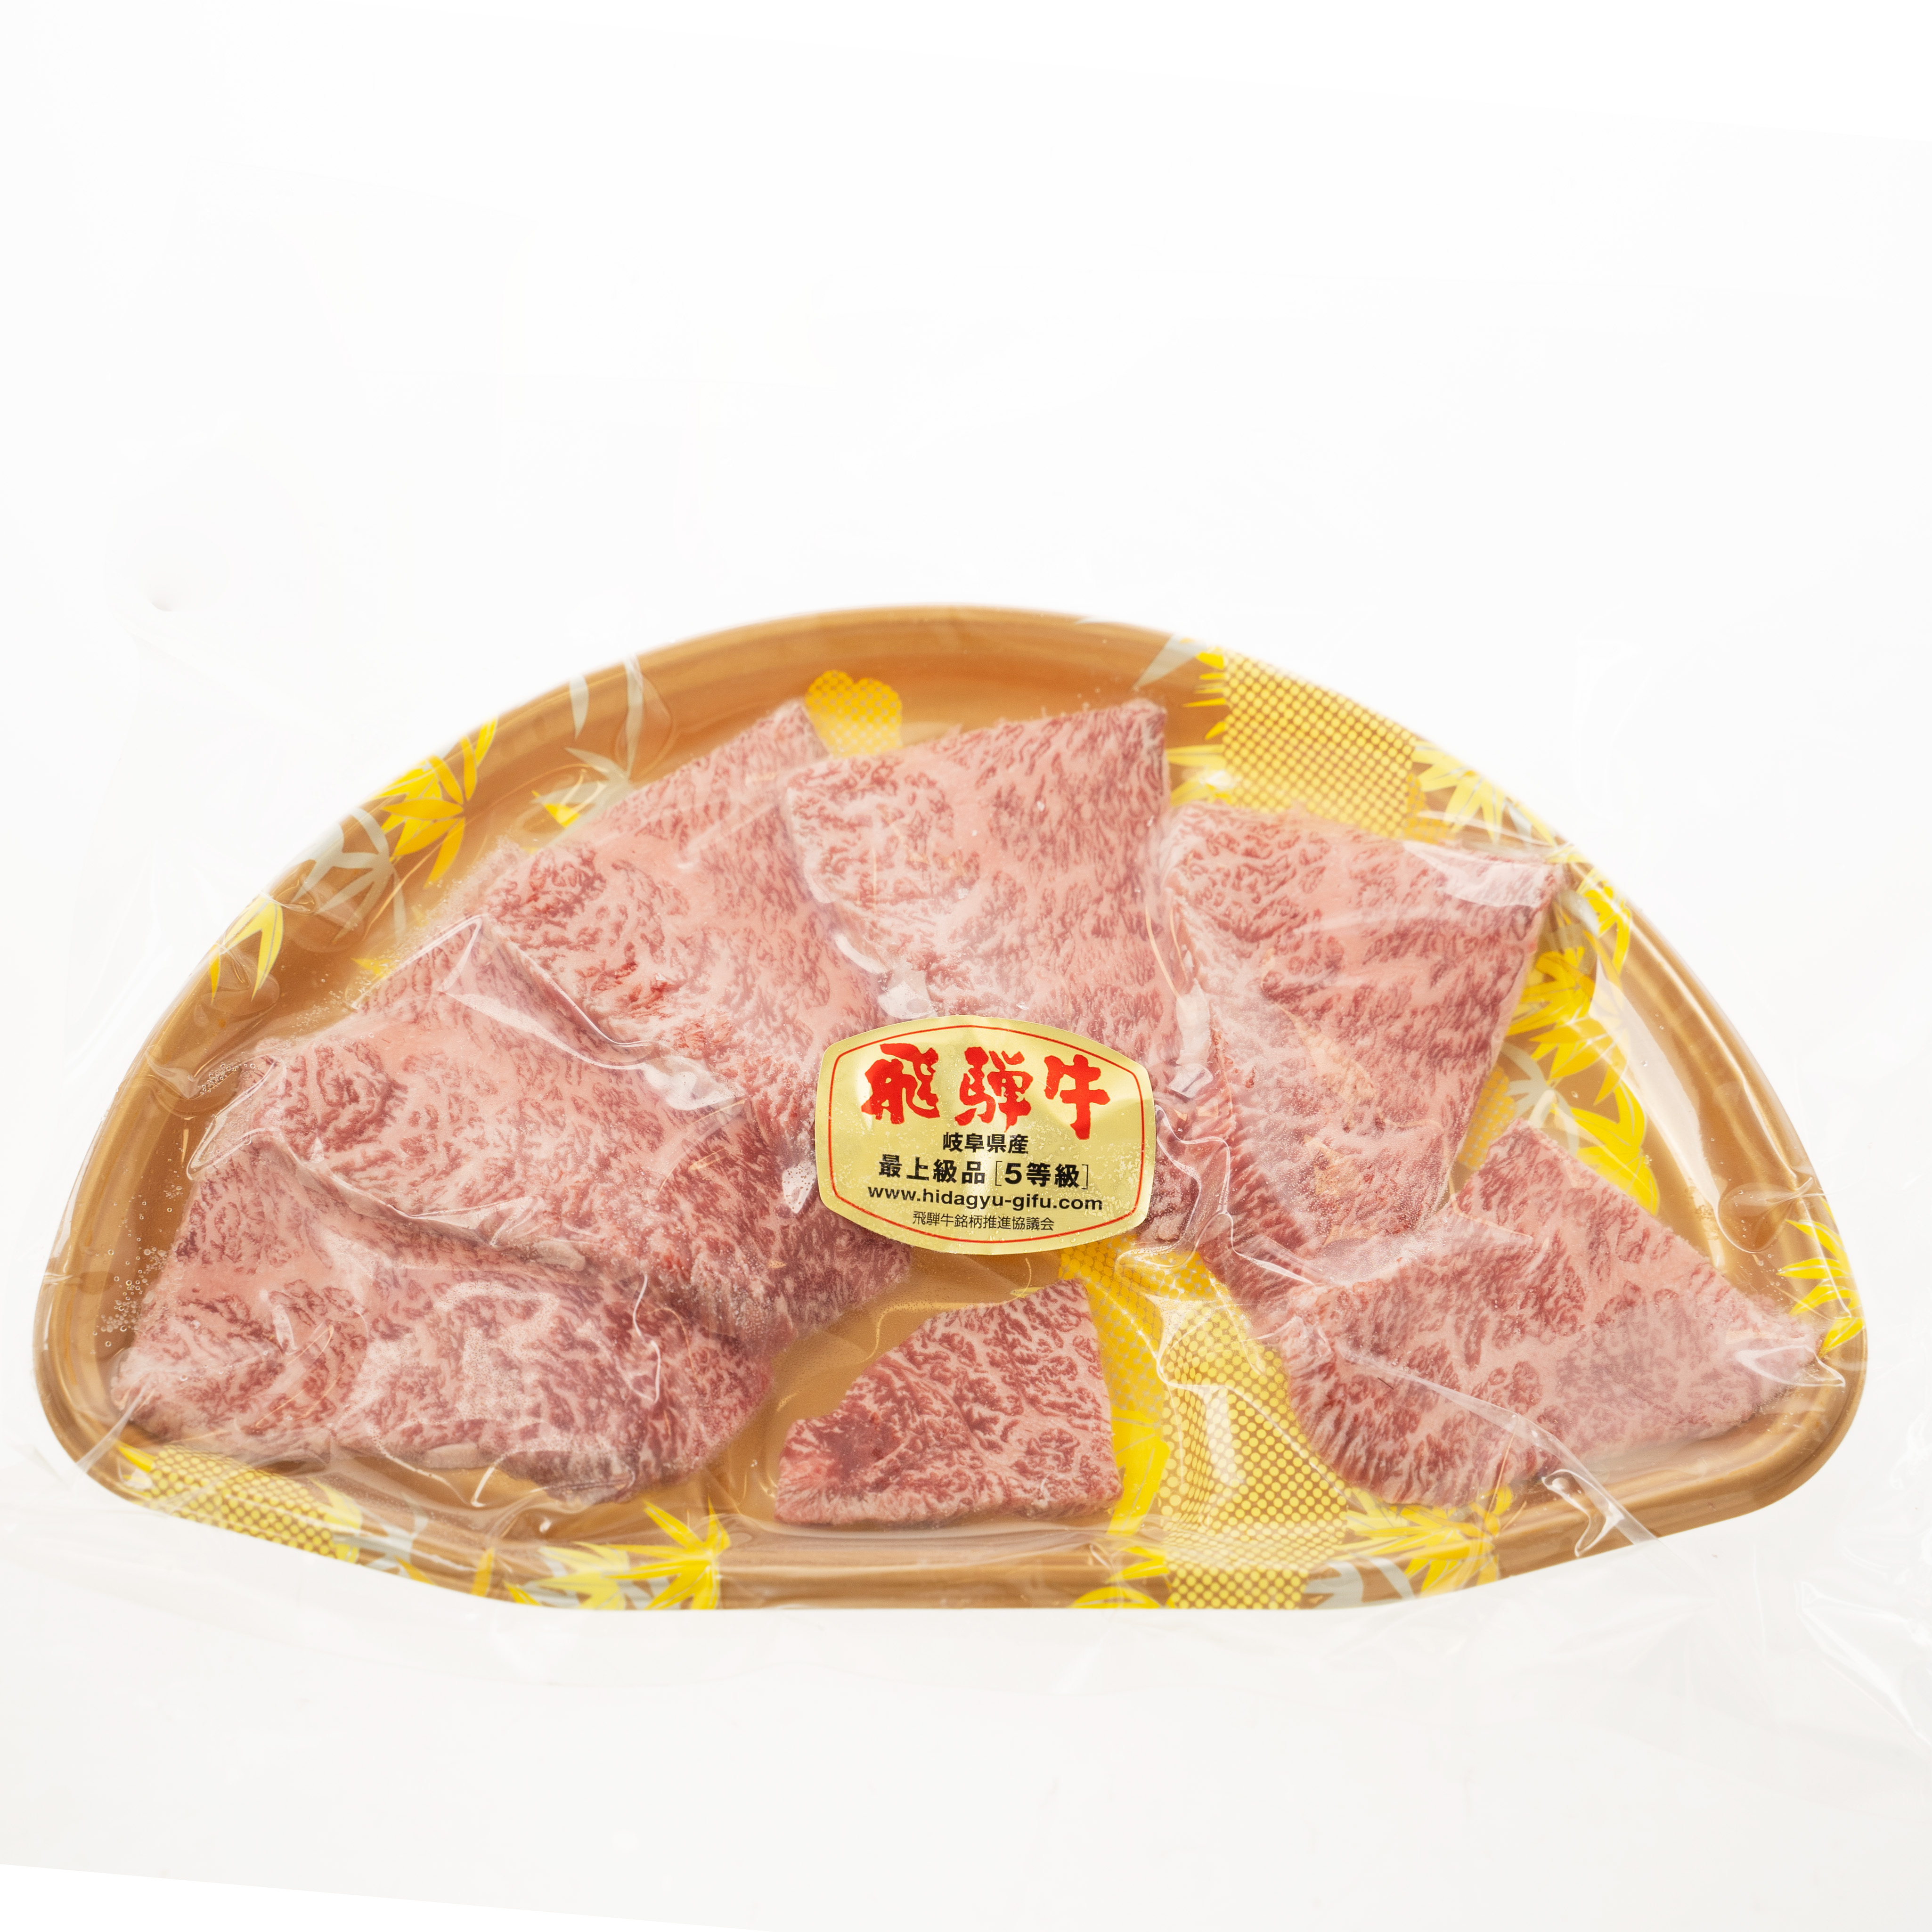 Hida Premium A5 Wagyu Beef Chuck Tail Flap 150g-eBest-Beef,Meat deli & eggs